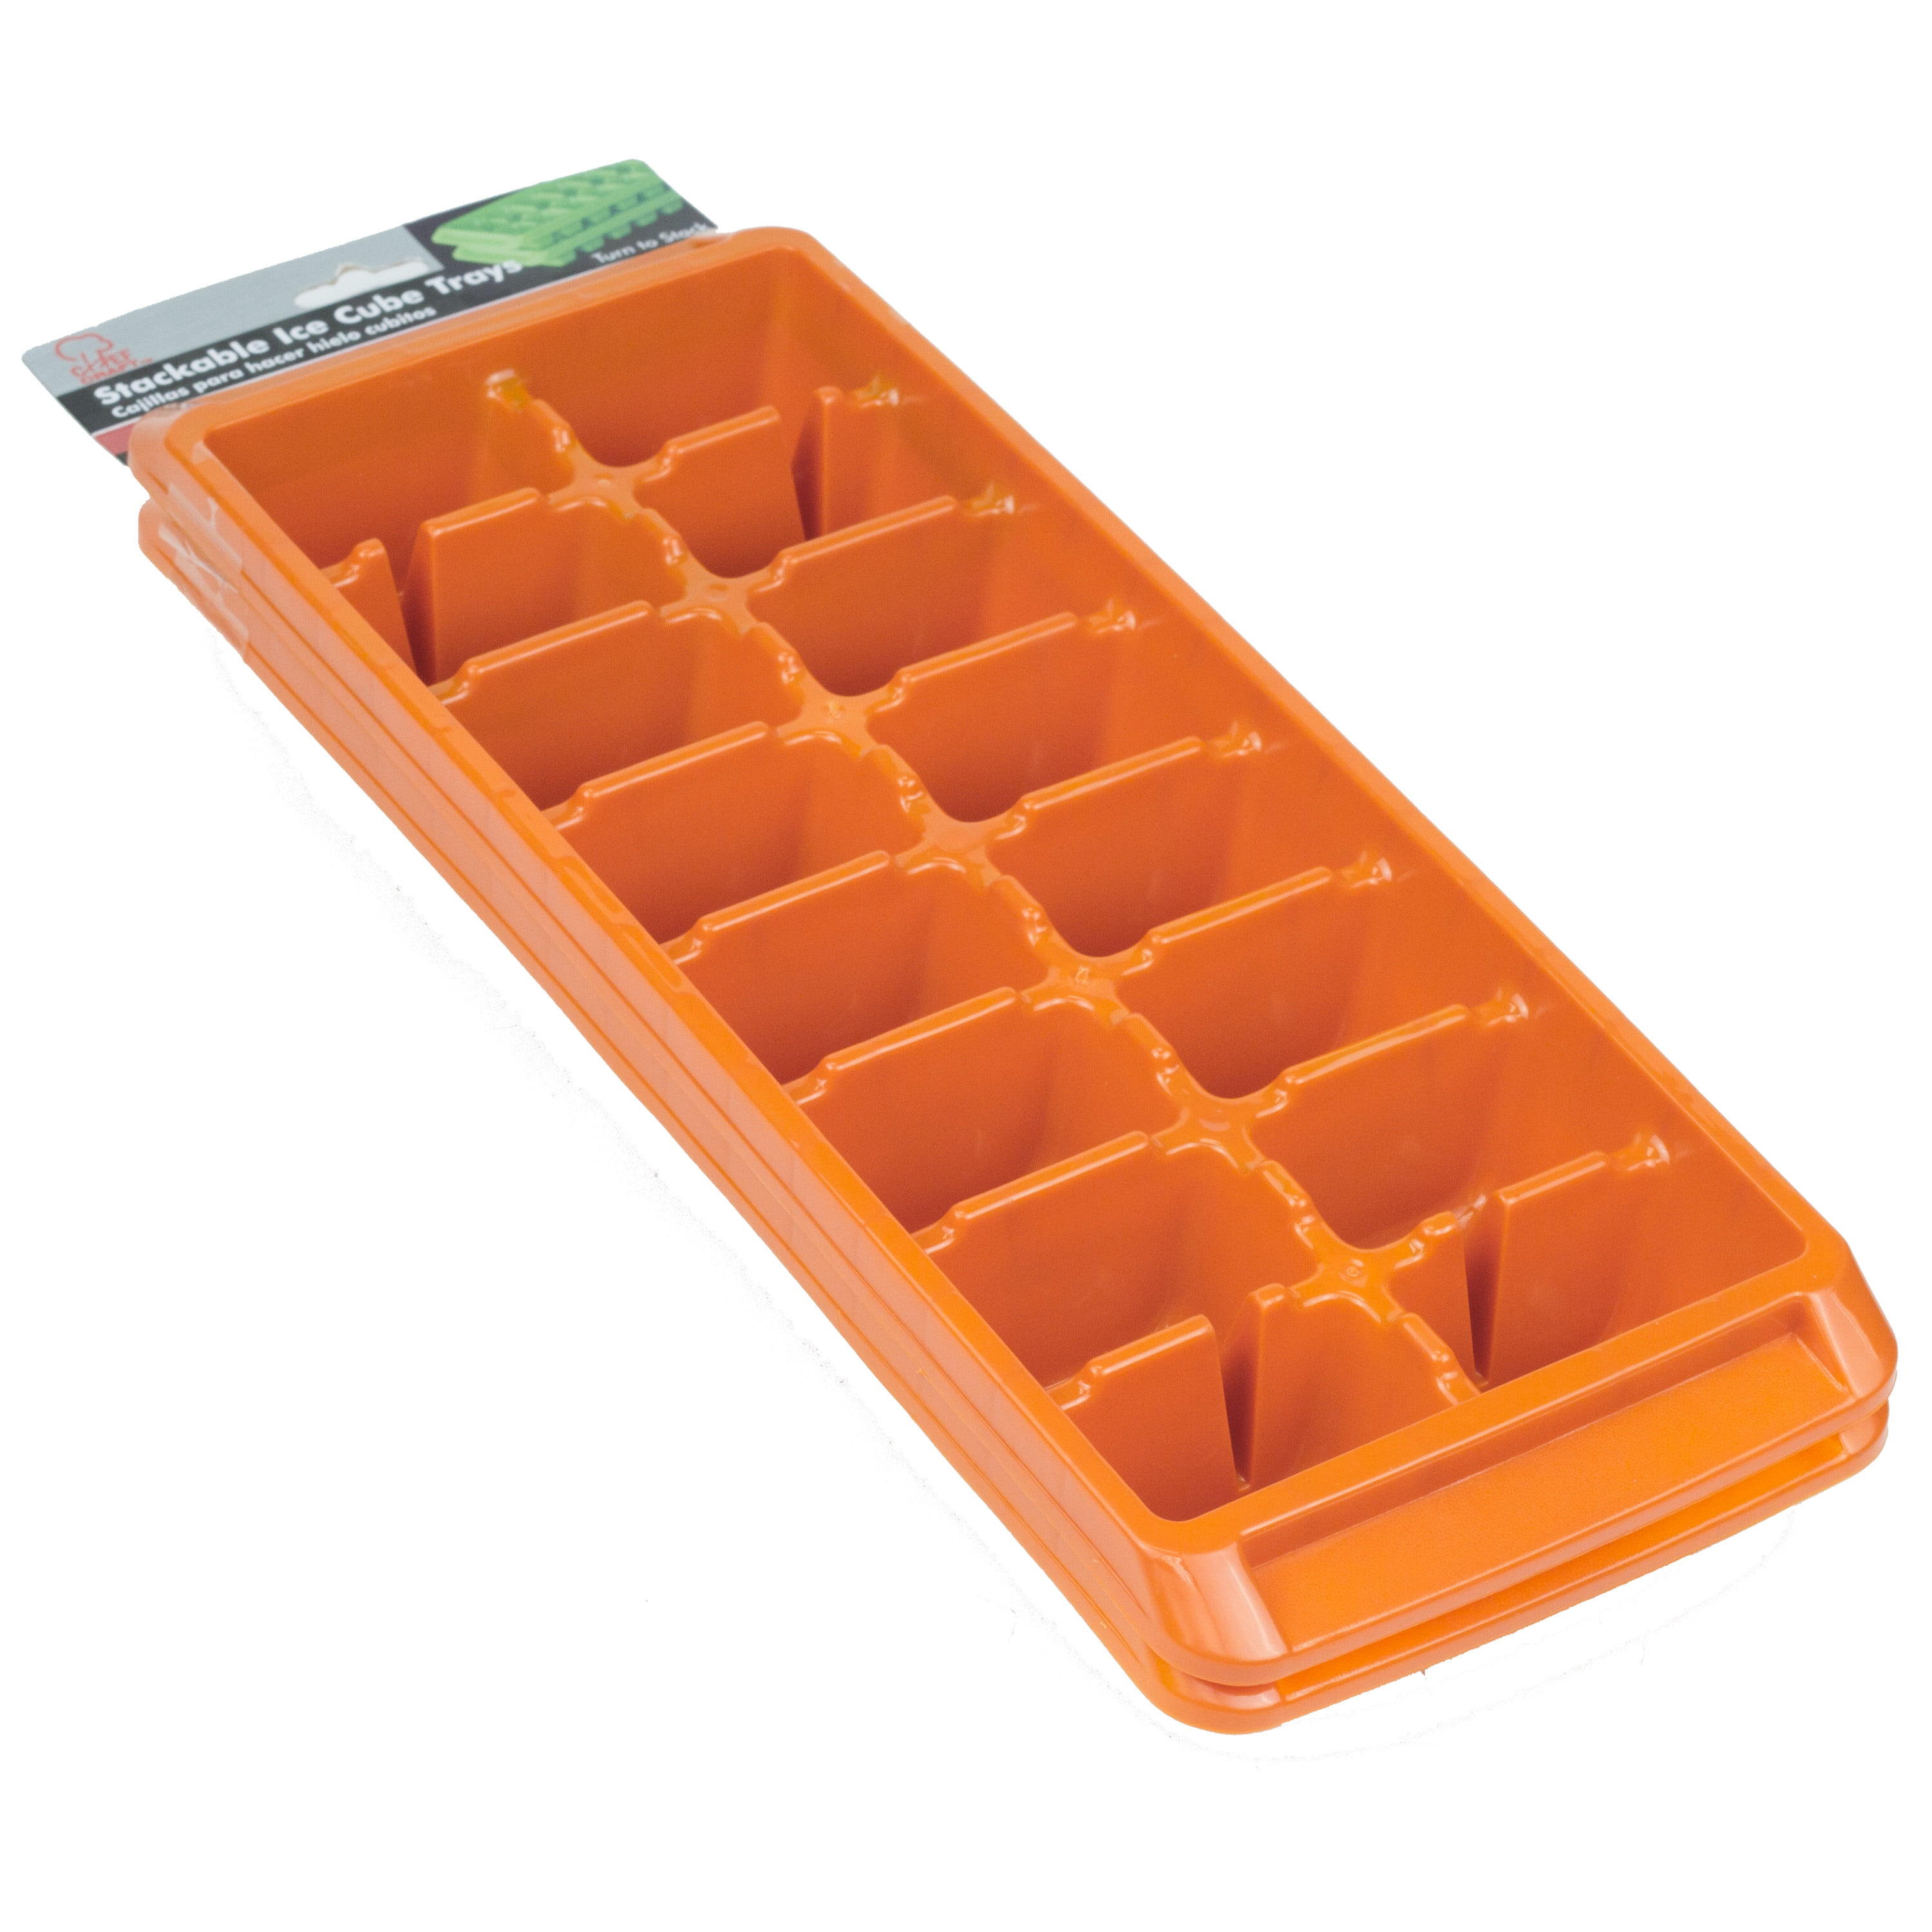 Chef Craft Flexible Thermoplastic 10-Cube Ice Cube Tray - Fun